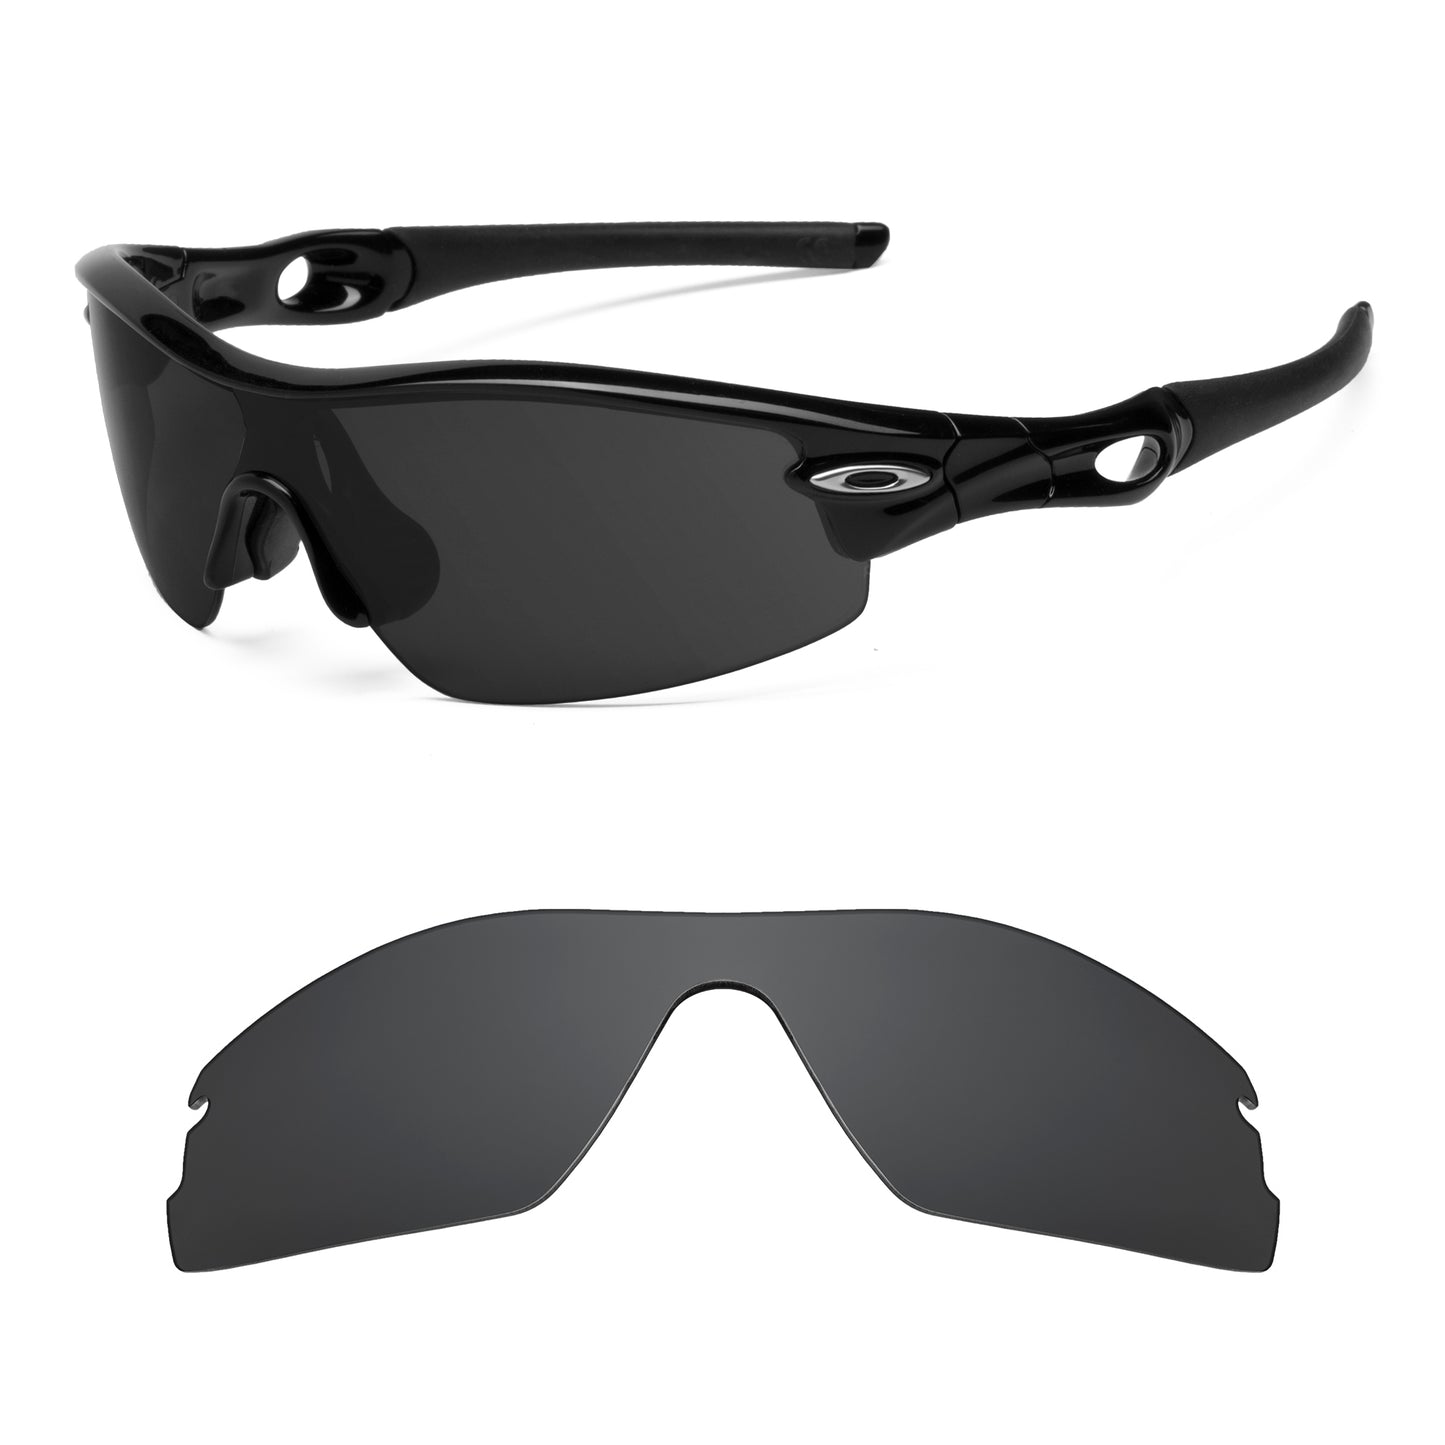 Oakley Radar Pitch sunglasses with replacement lenses